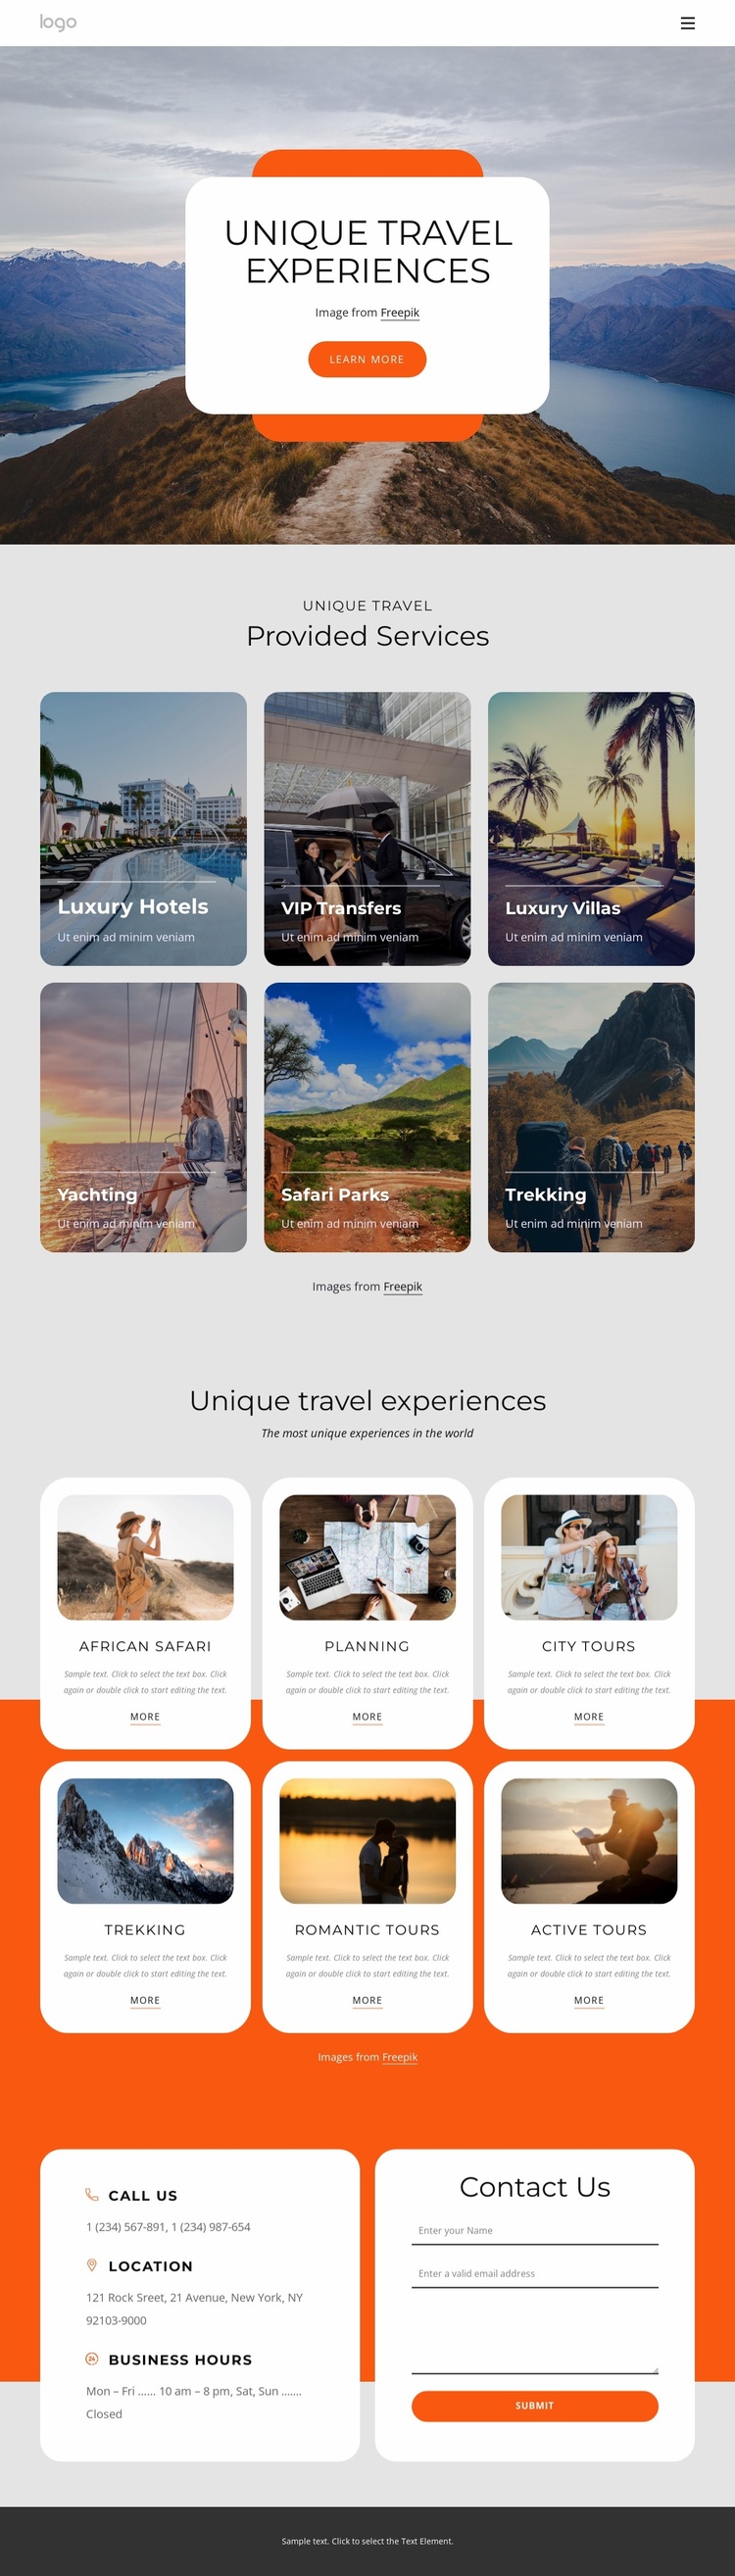 Luxury small-group travel experience eCommerce Template